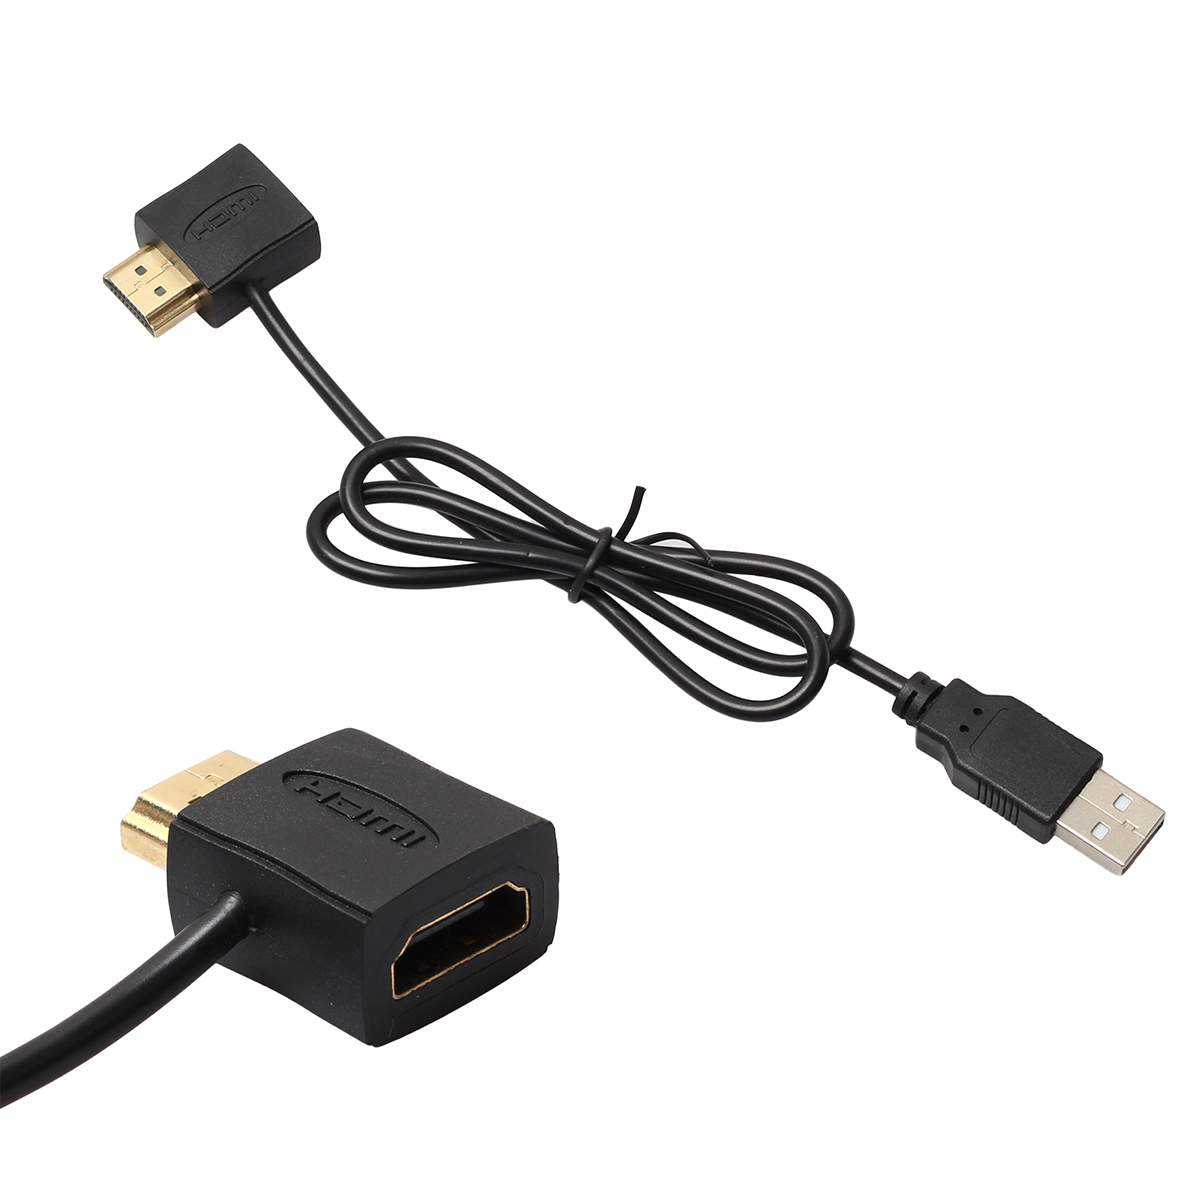 50cm HDMI Male to Female Convertor Splitter + USB 2.0 Male Charger Cable